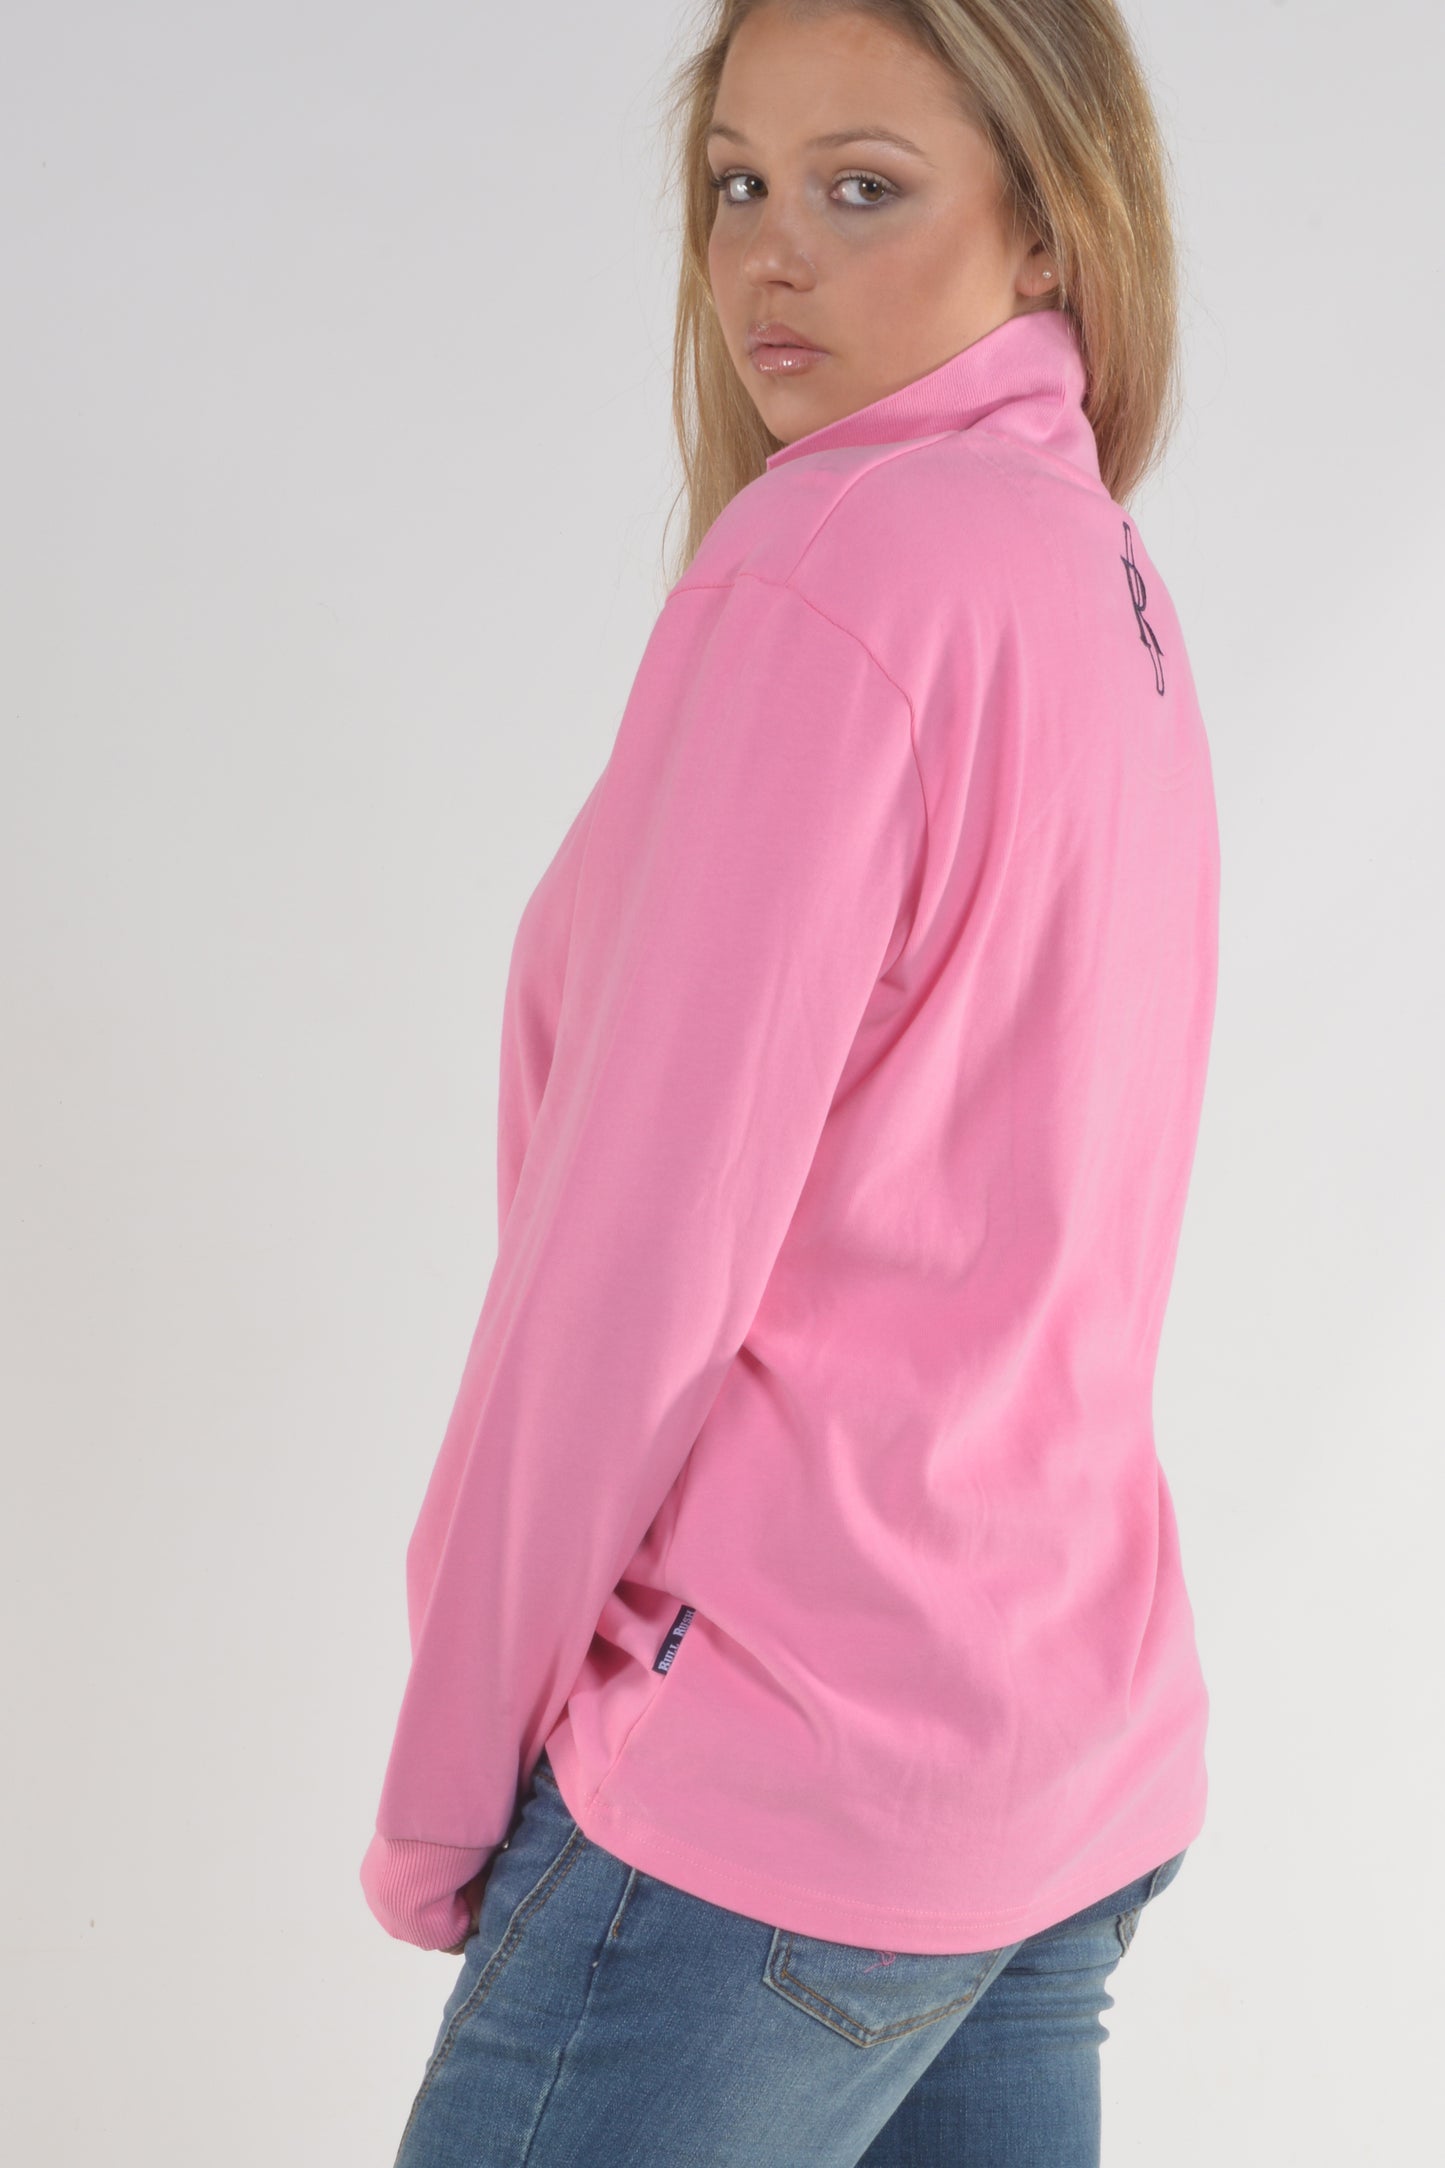 POLO IN THE AUTUMN- Pink (unisex)